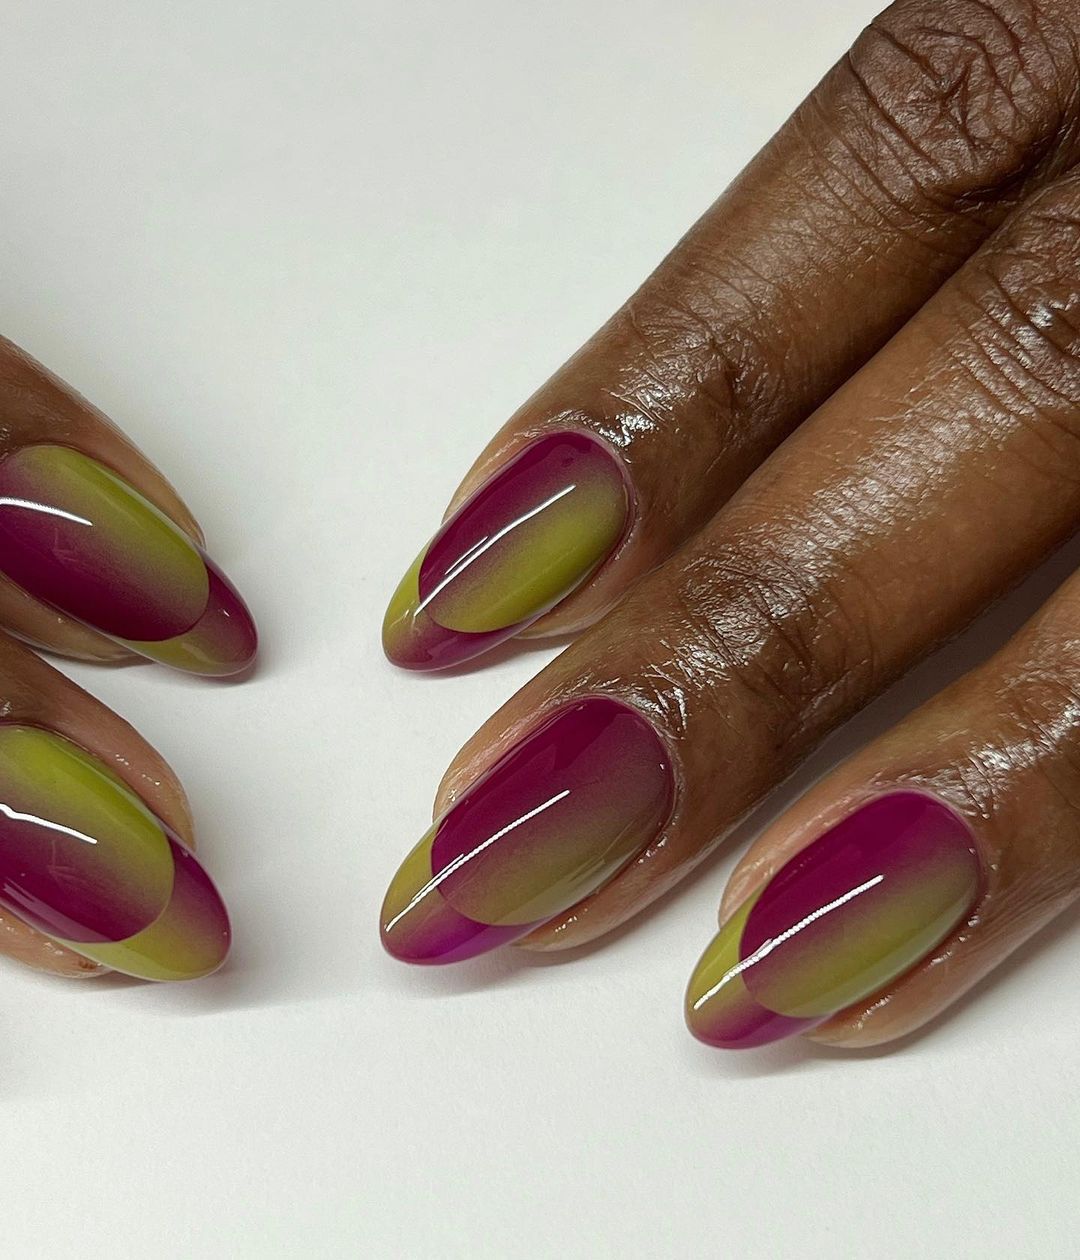 “French Illusion” Nails Are a Trippy Take on the Classic